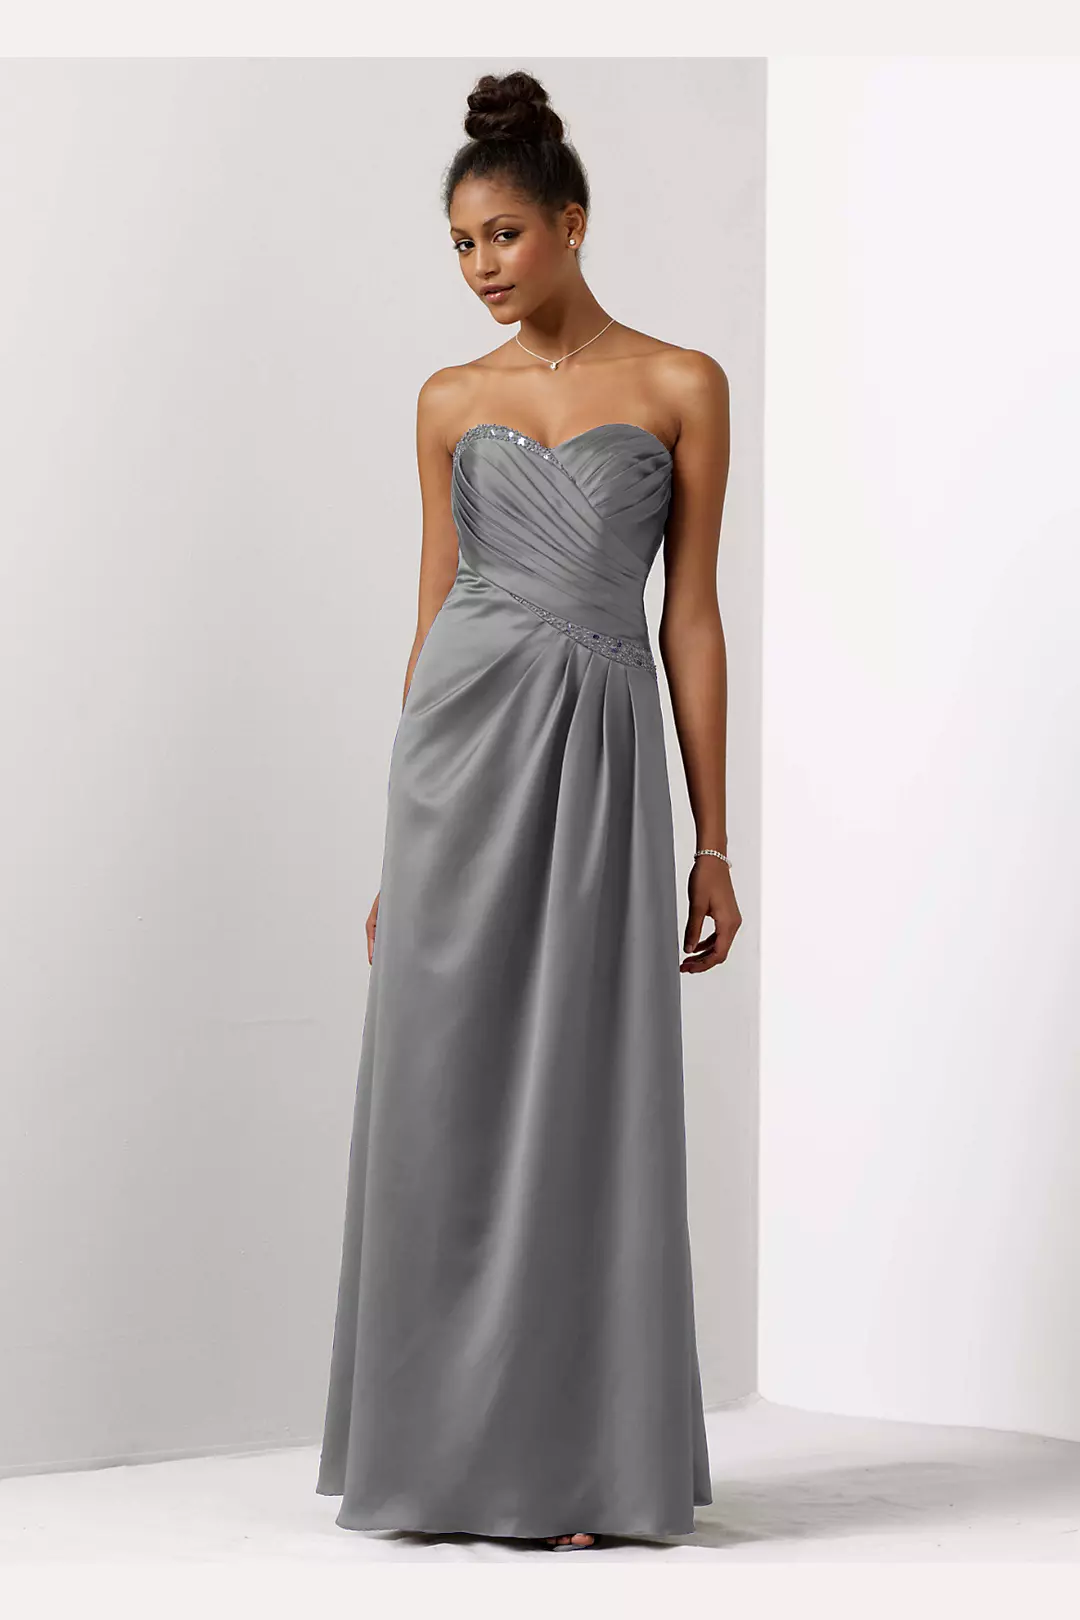 Satin A-Line Draped Gown with Beaded Neckline Image